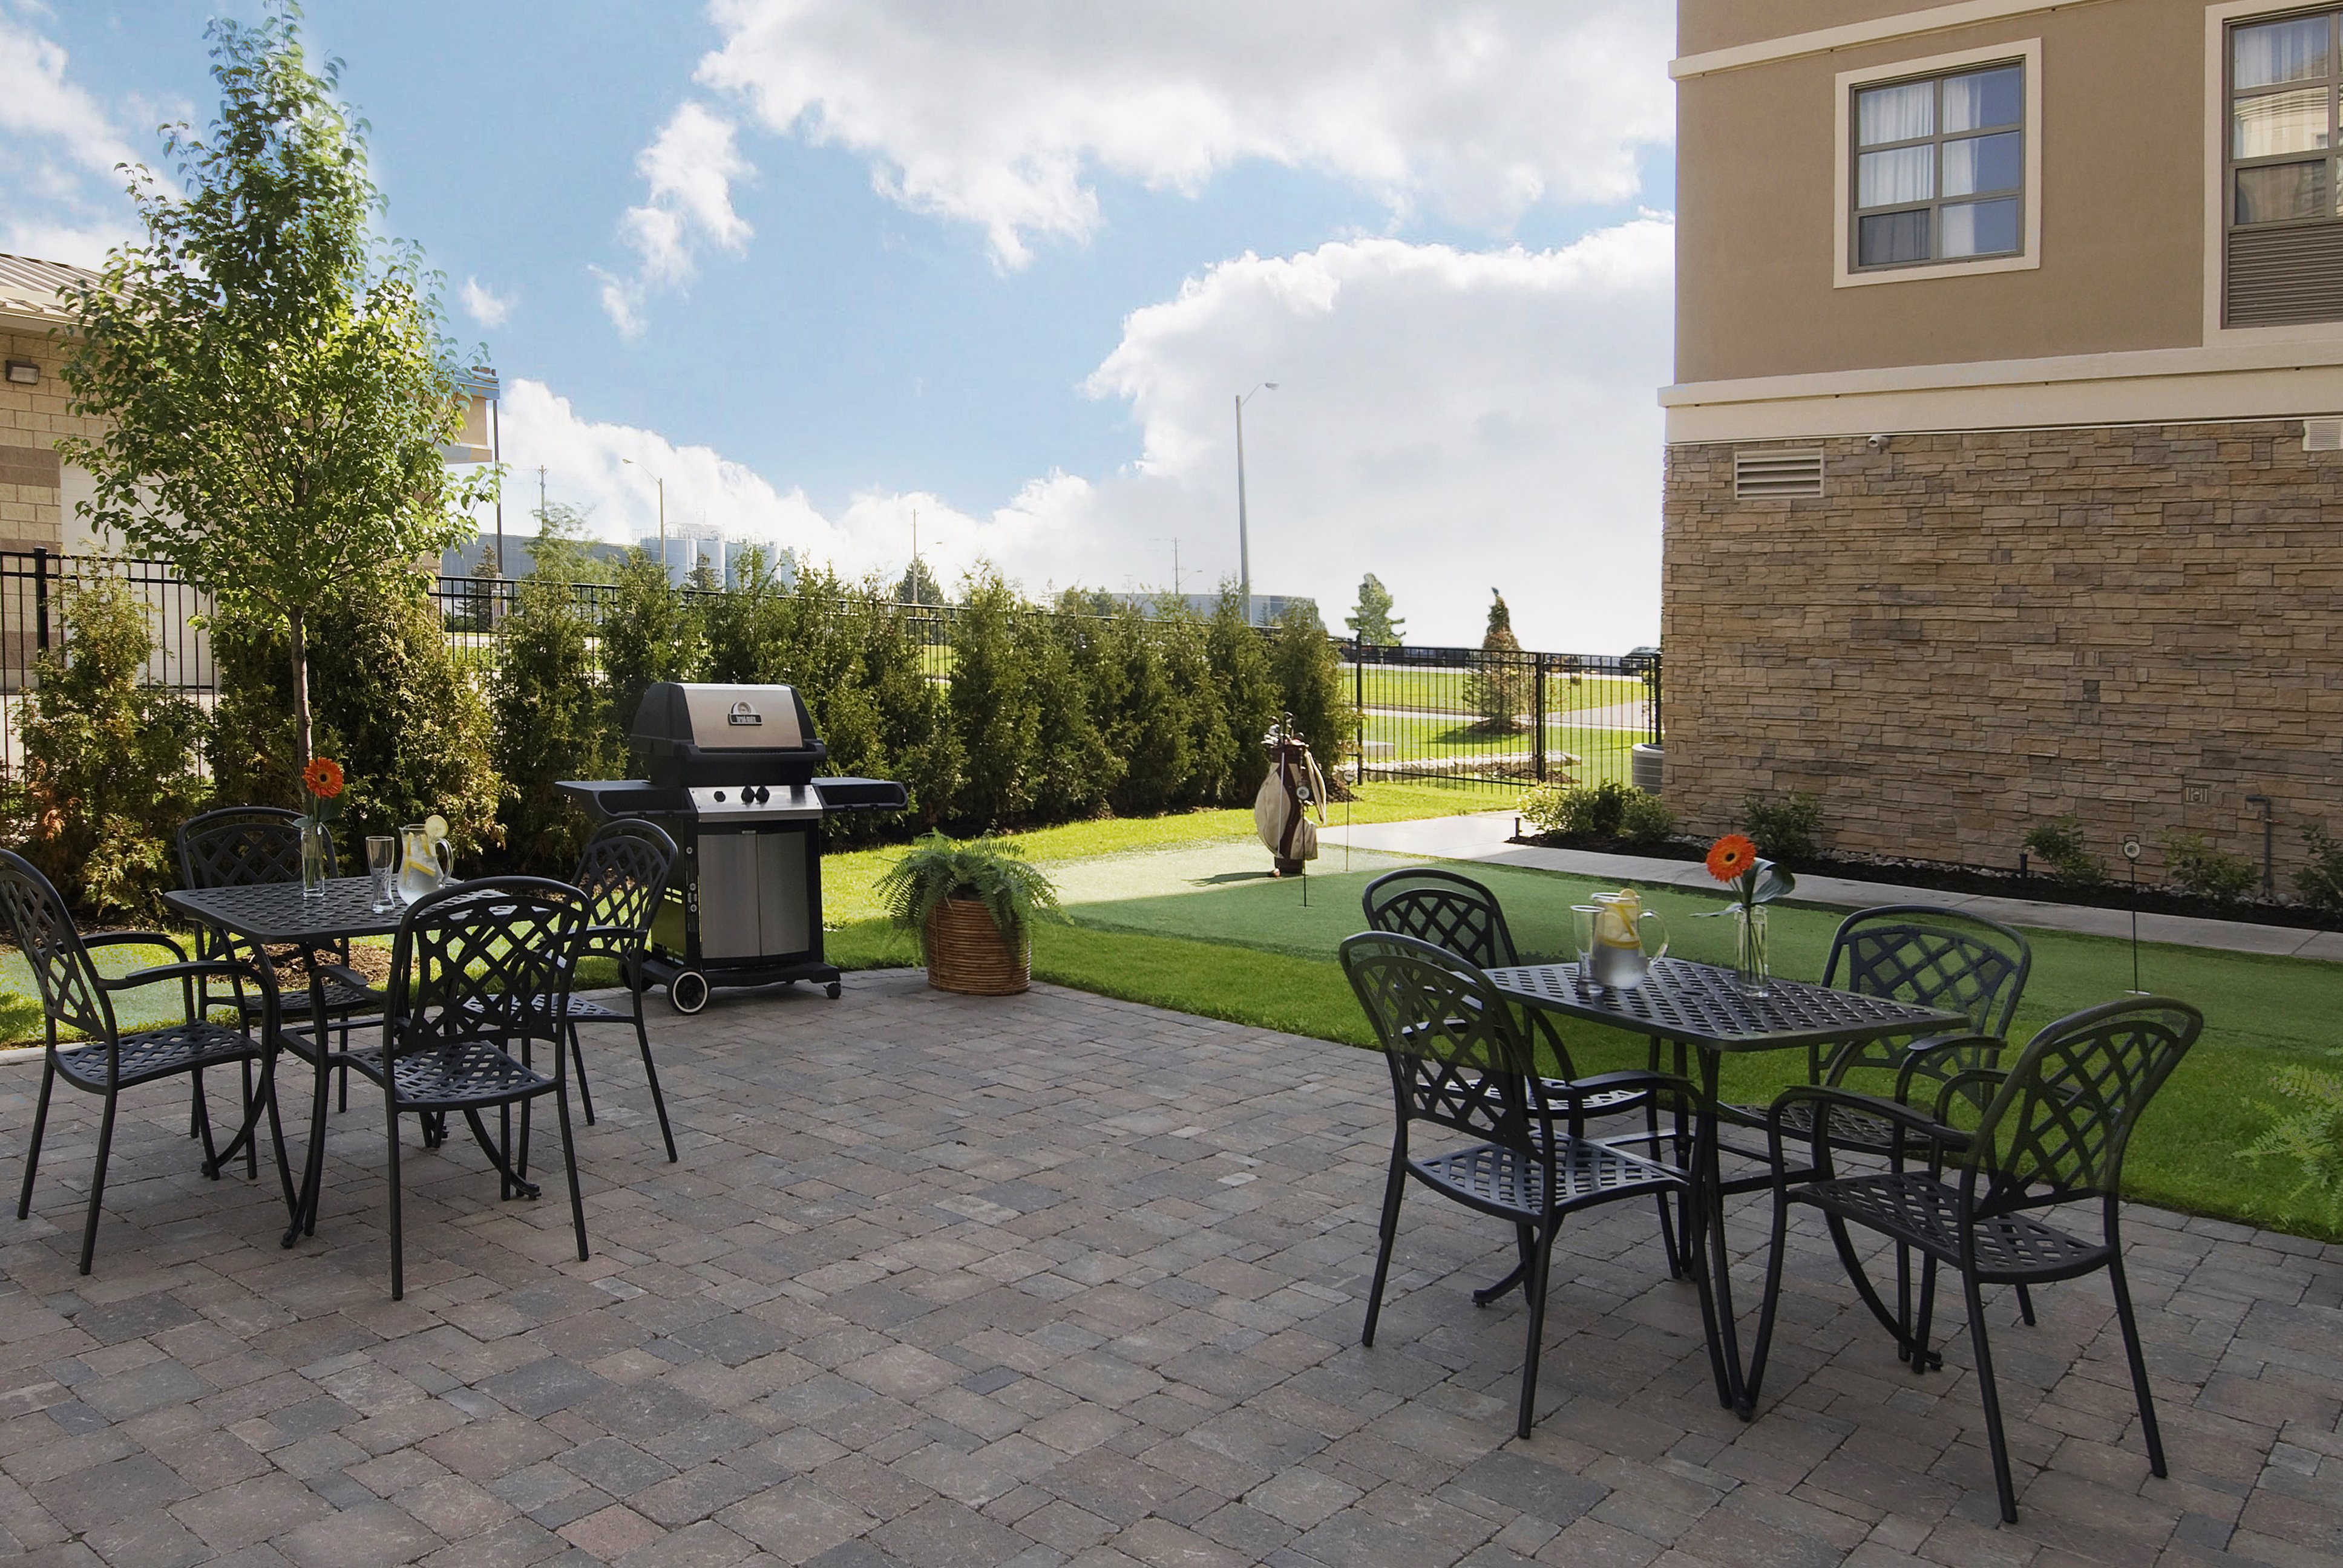 Guest Patio-Barbeque and Putting Green